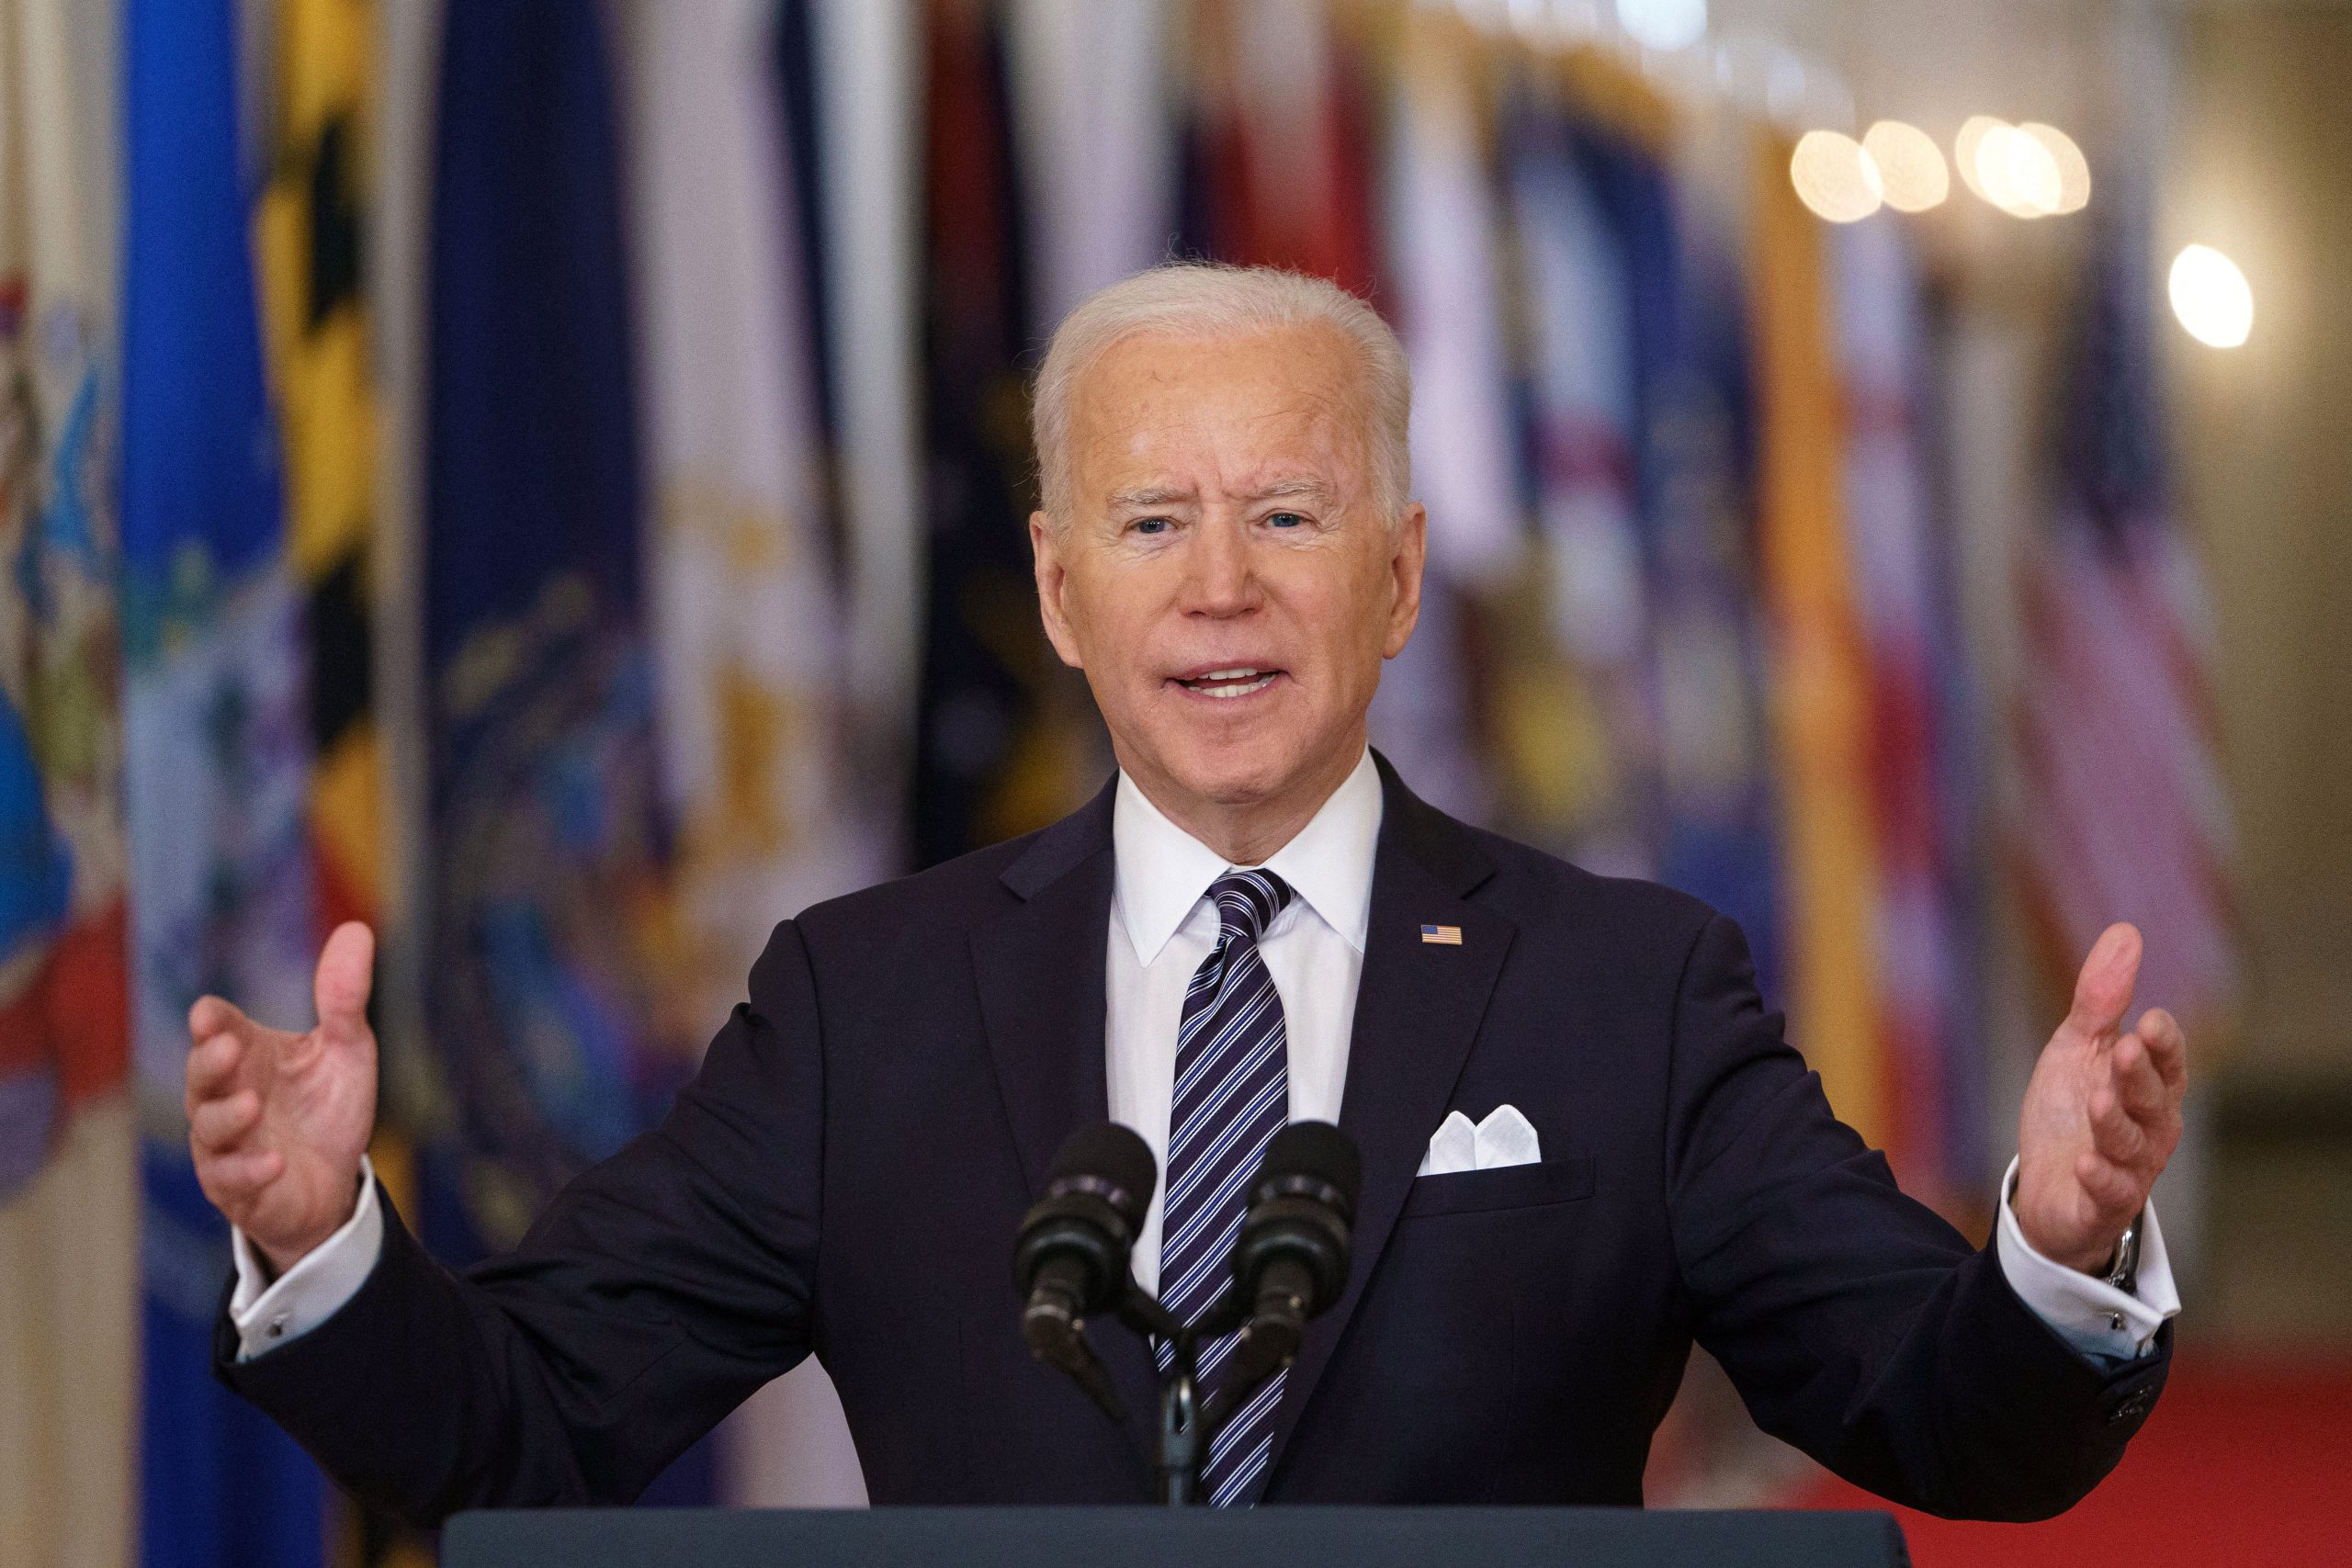 President Biden says $81 billion allocated for schools to re-open safely